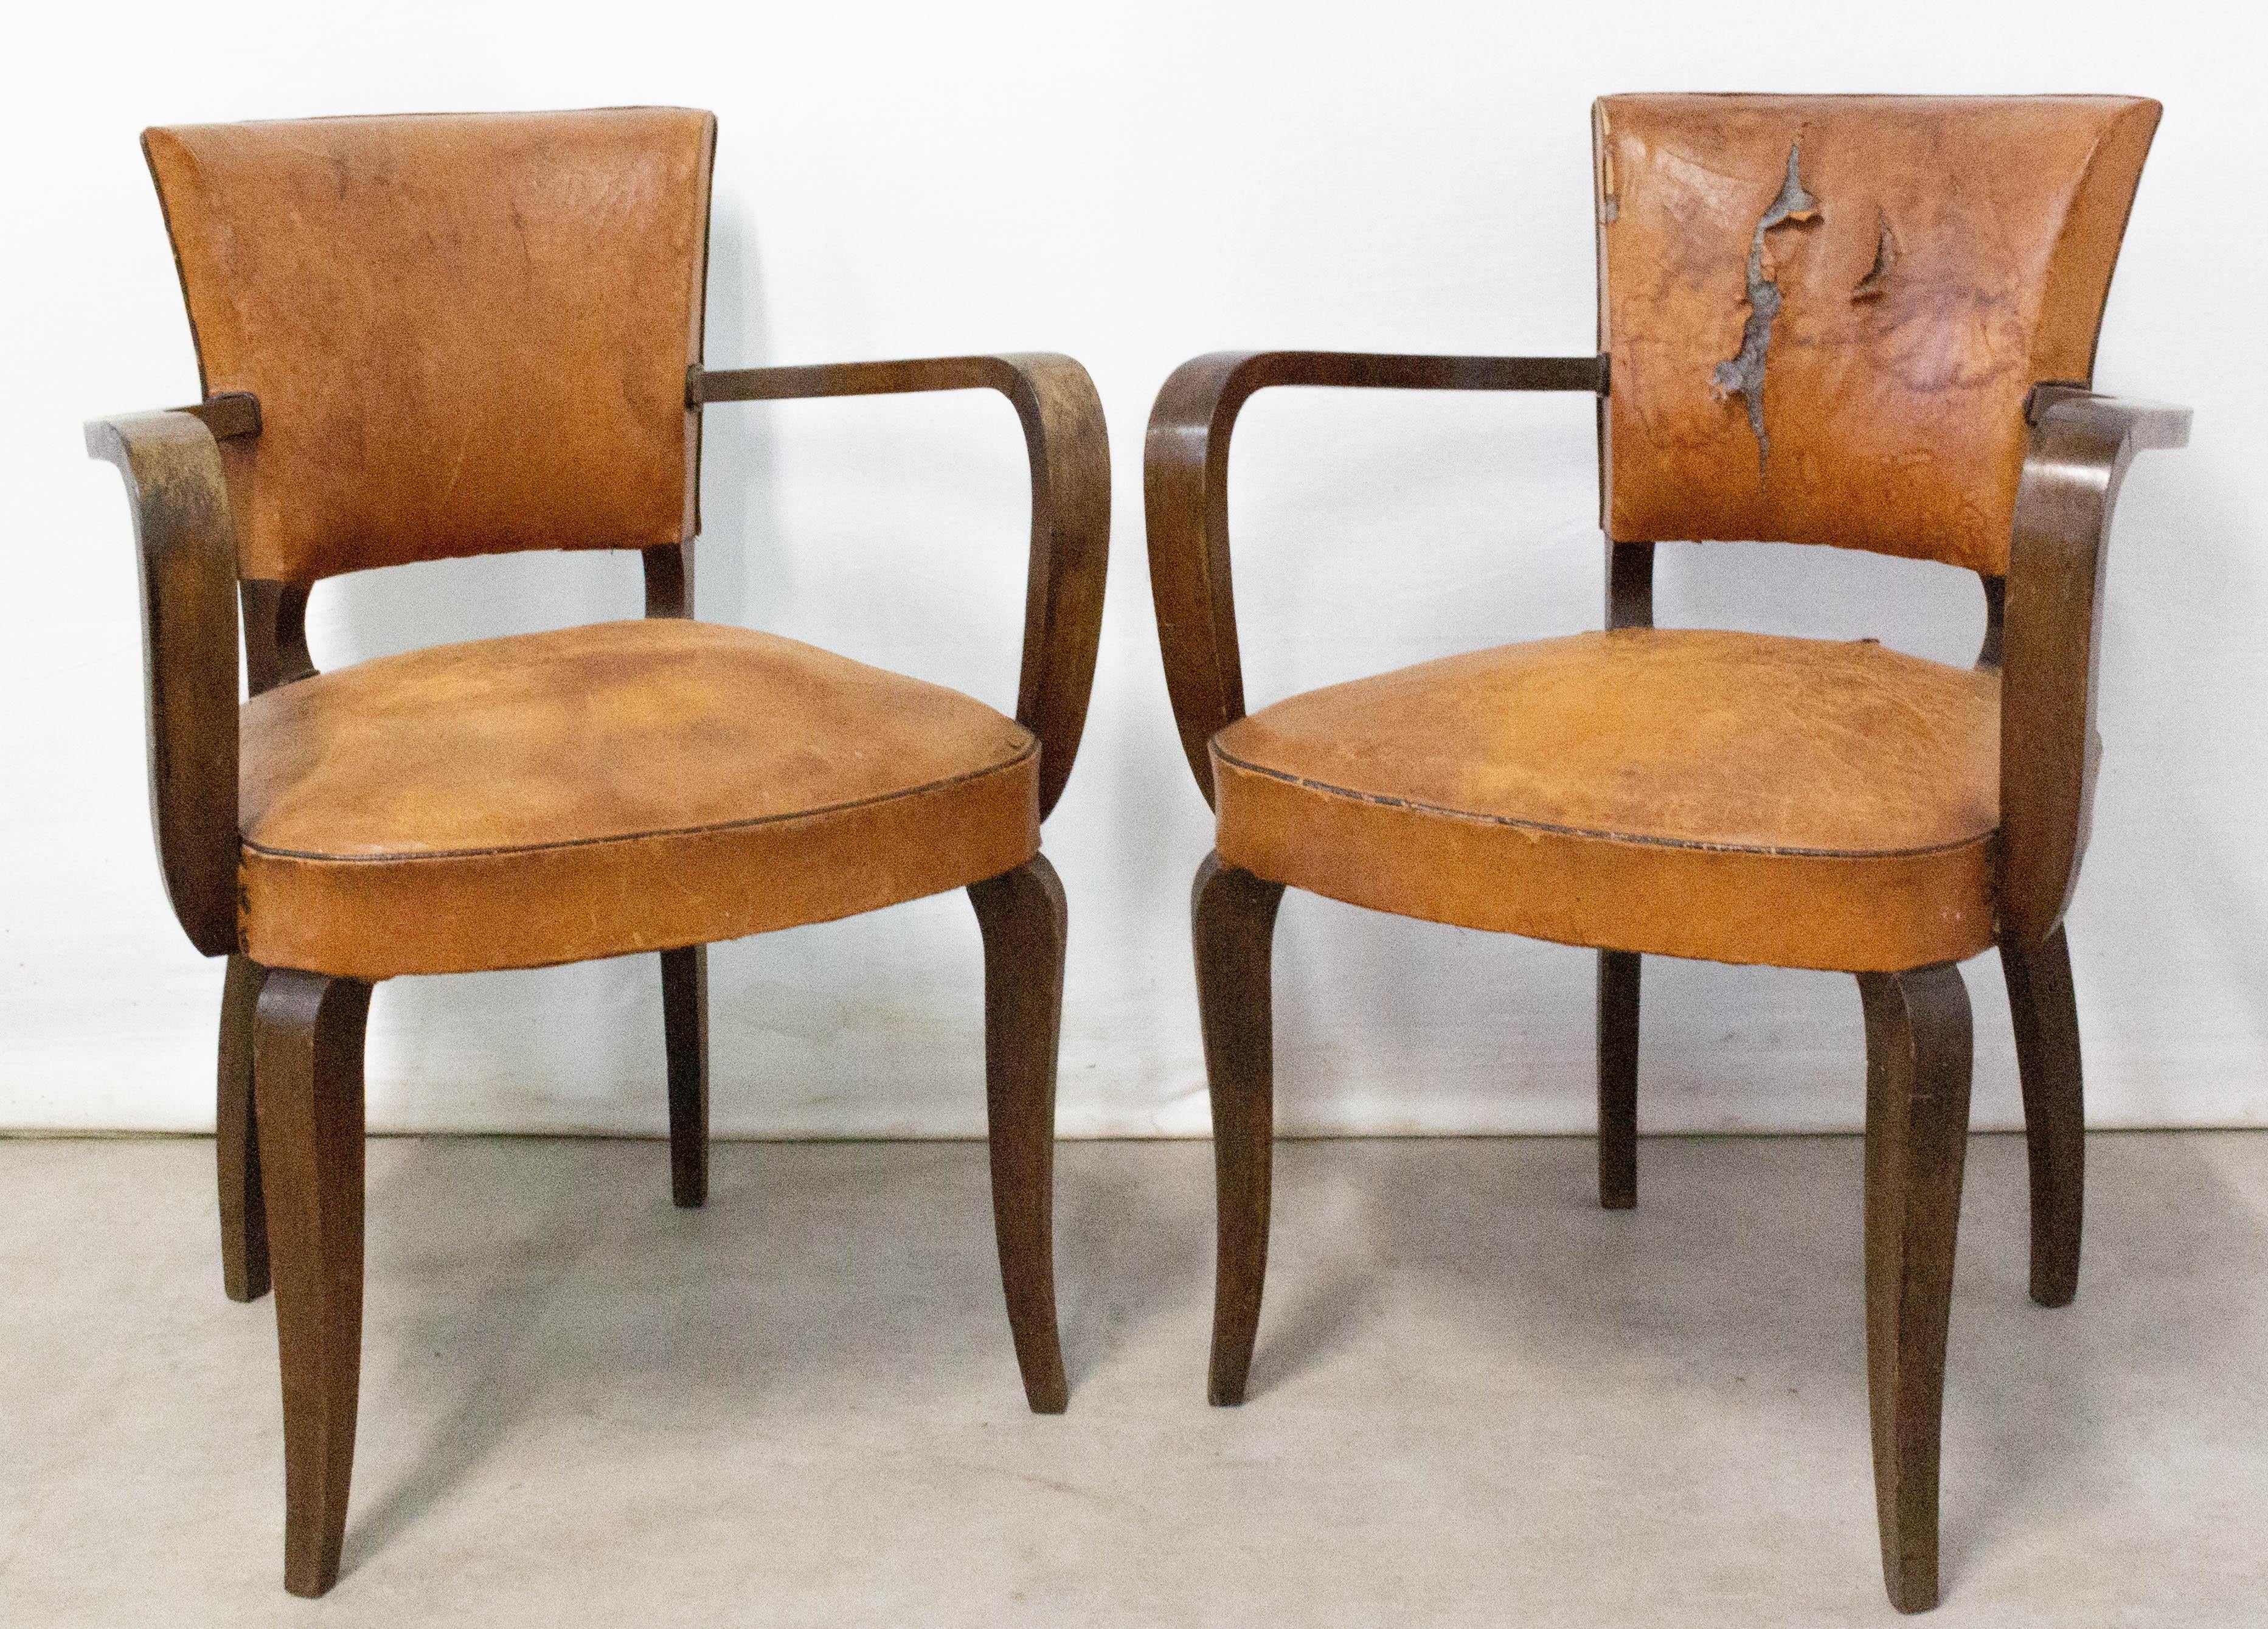 Pair of French Art Deco bridge chairs, circa 1930
Two open armchairs to be re-upholstered
Original vintage condition 
Frames are sound and solid
Alternatively the leather is easily changed to suit your interior please ask if you would like a